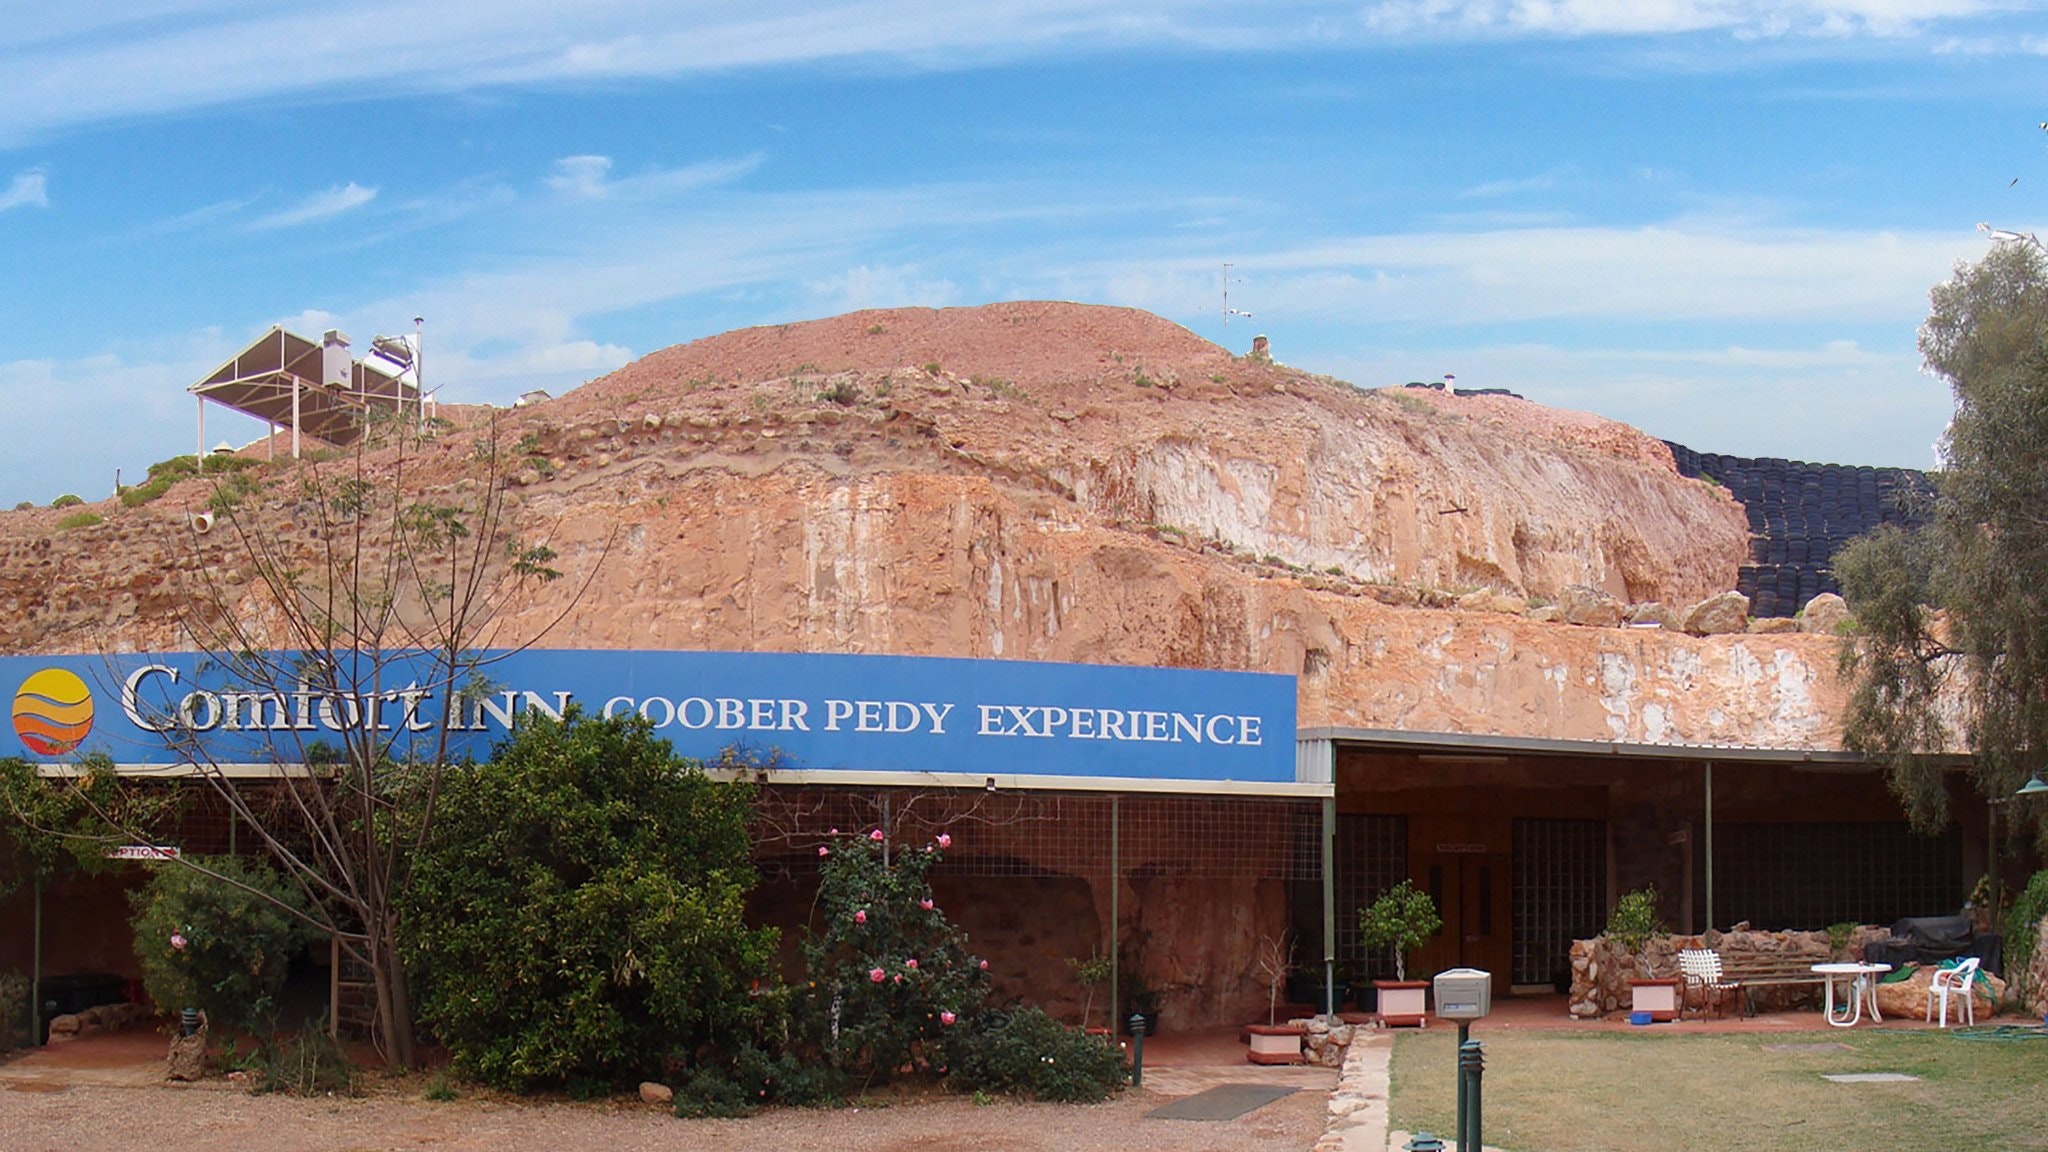 Comfort Inn Coober Pedy Experience Motel - Hotel Accommodation